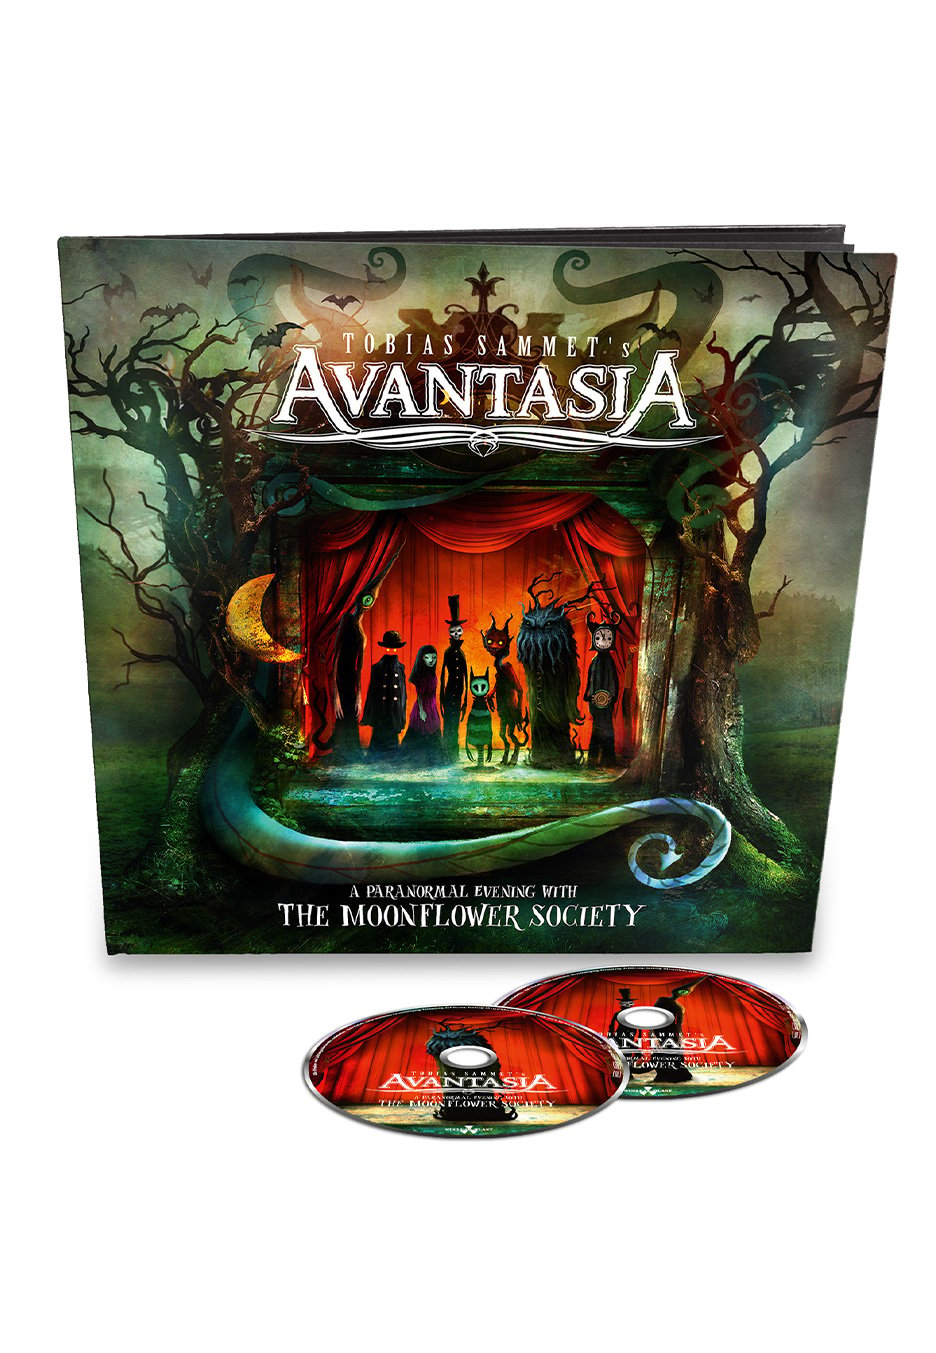 Avantasia - A Paranormal Evening With The Moonflower Society Ltd. - Artbook 2 CD